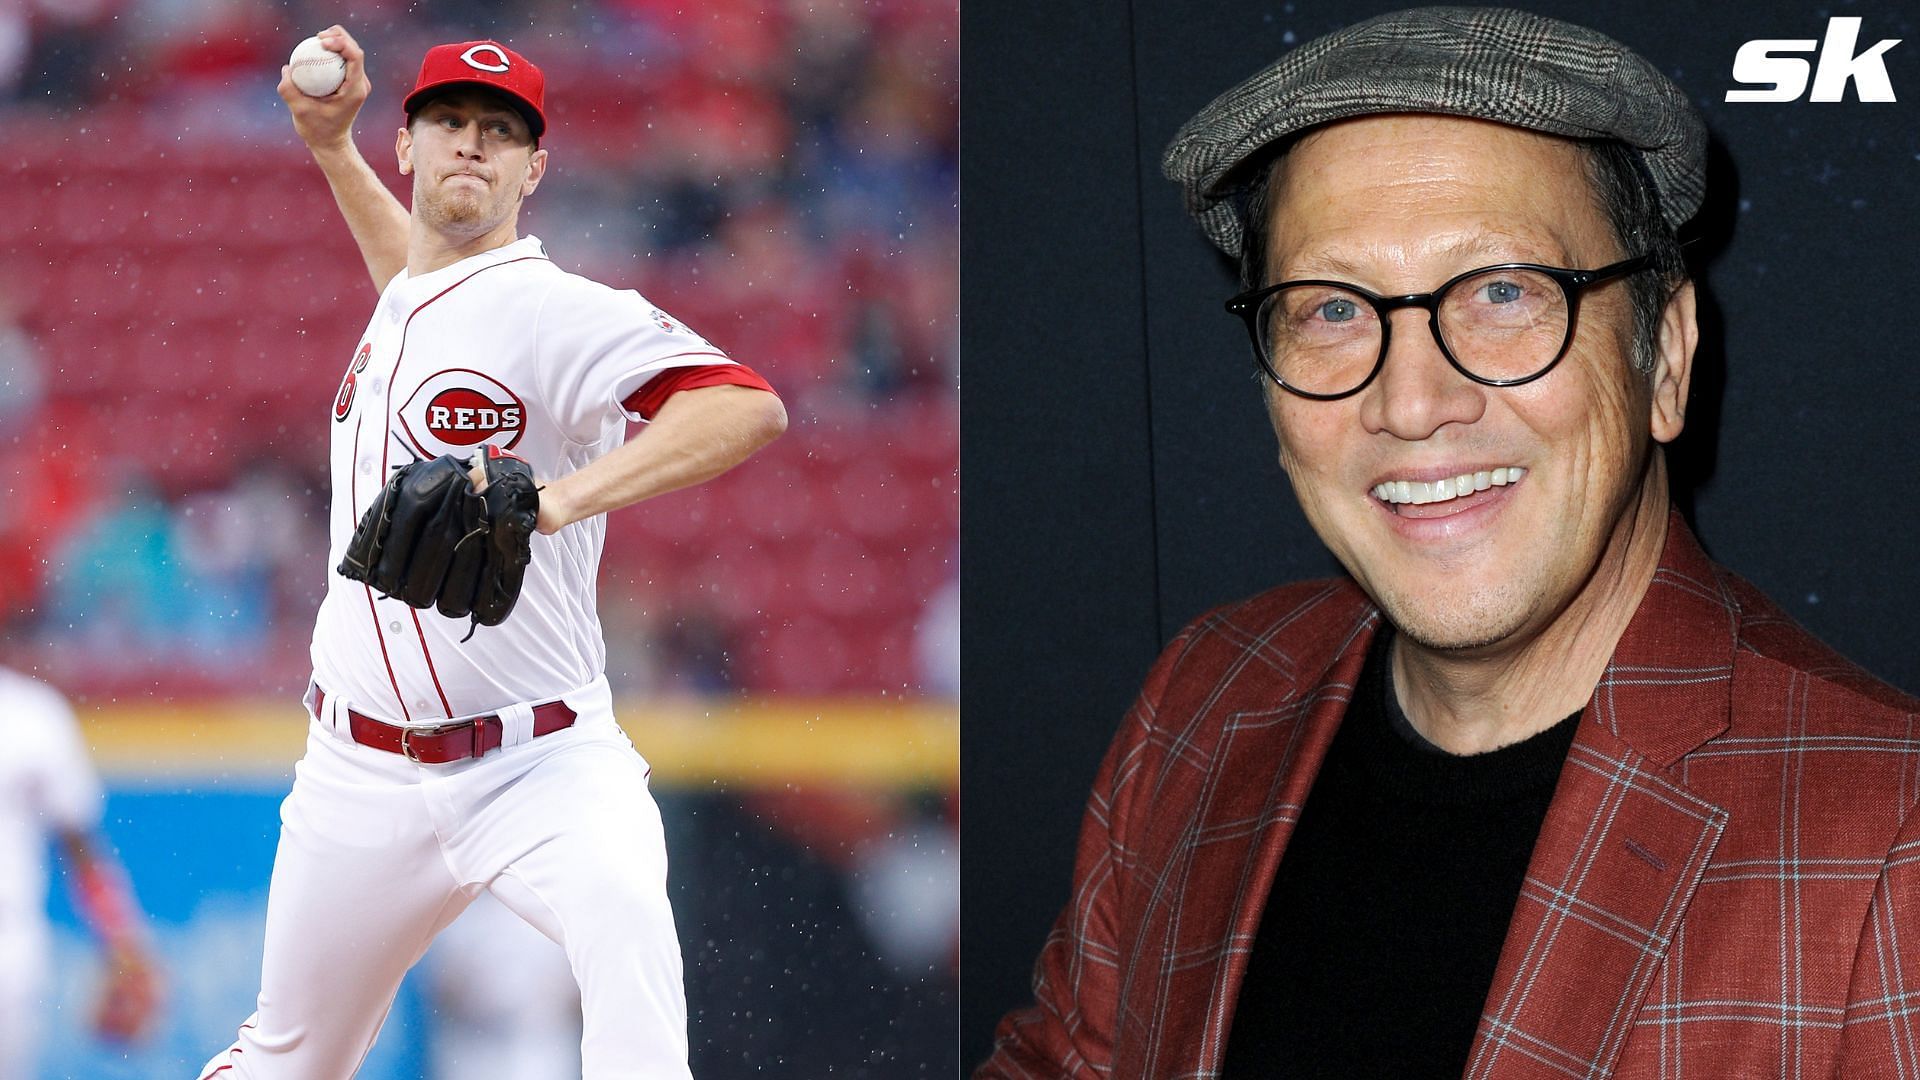 When former MLB pitcher Jon Moscot recounted his experience of working with Rob Schneider in 